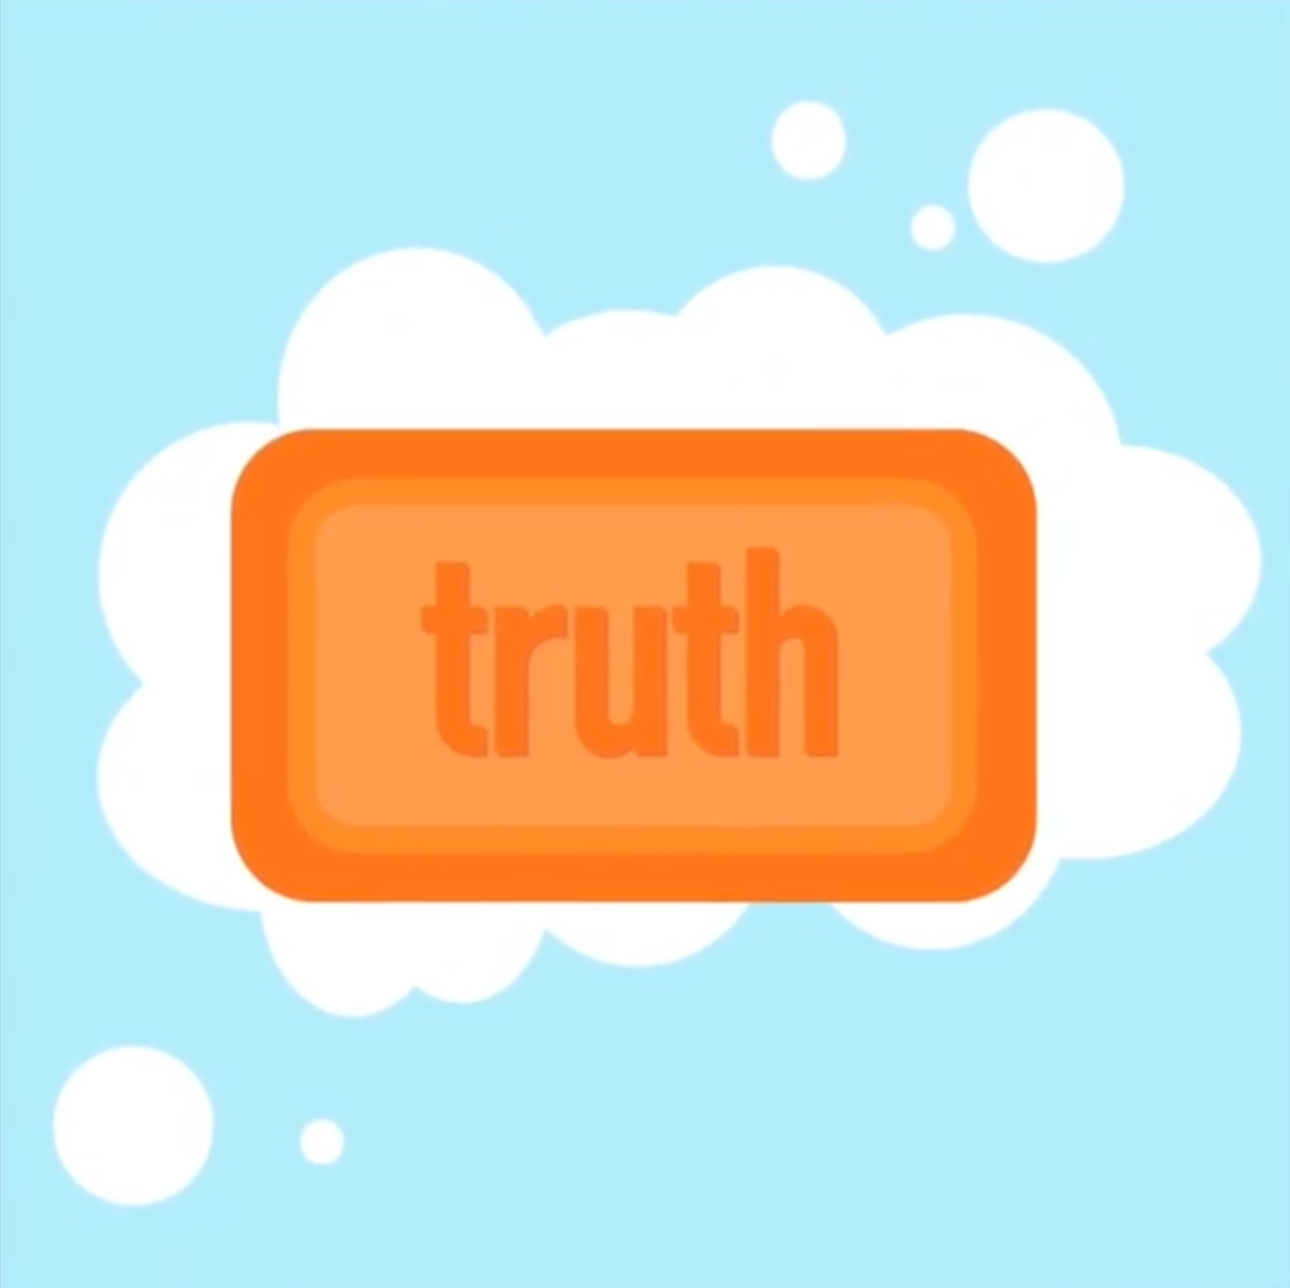 ENTITY gives network conversation tips. Photo of a soap labeled "truth."